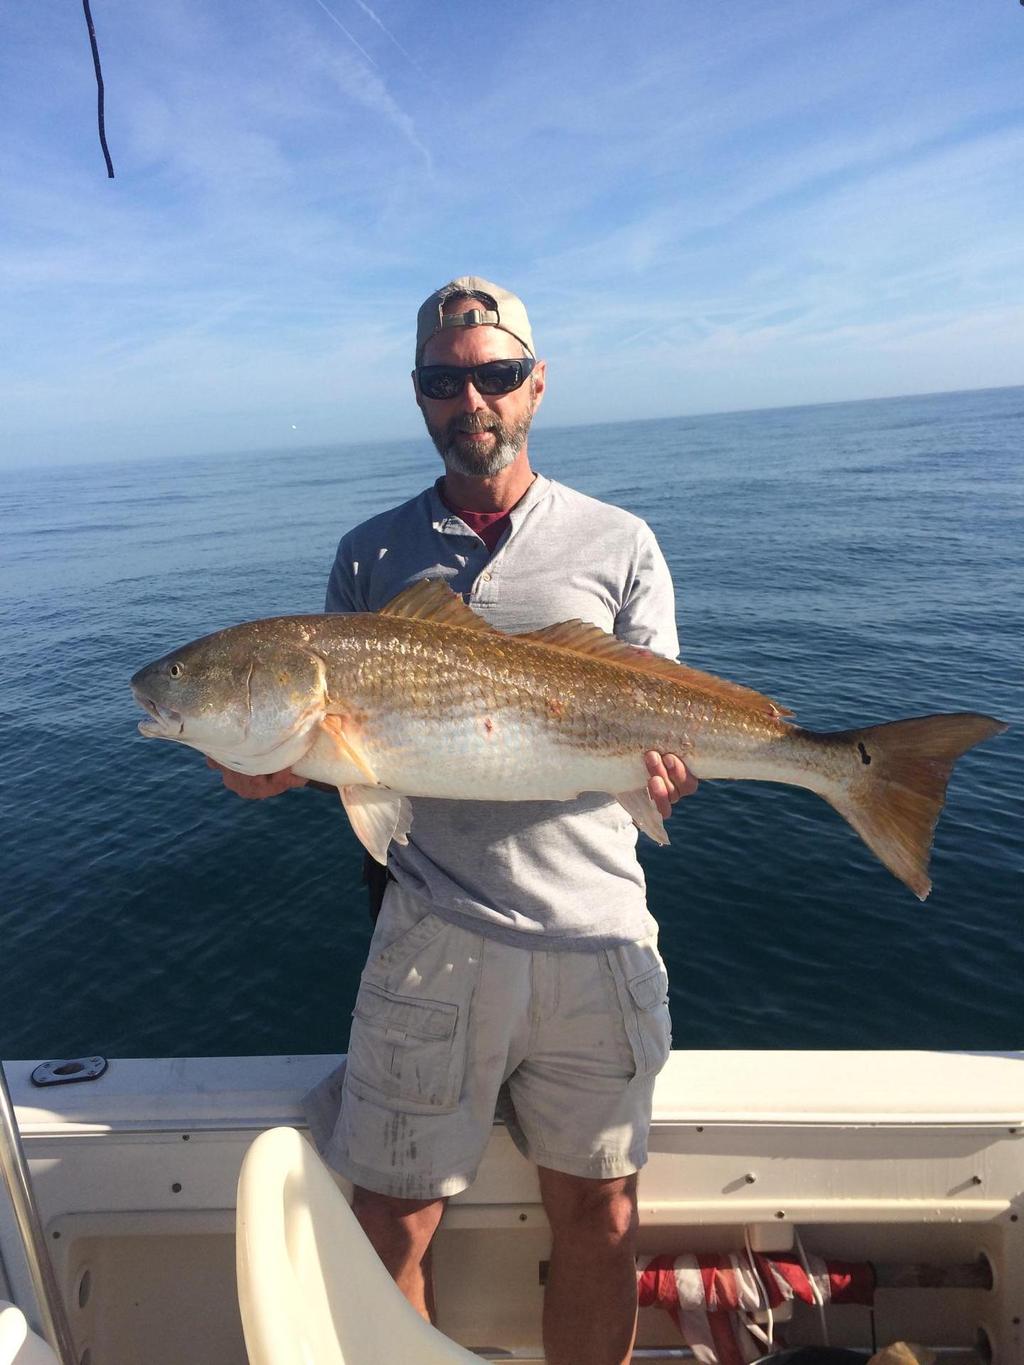 Daryl Chandler is holding a nice trophy red fish that he caught while jigging with paddle/screw tails at Gray s Reef Sanctuary.